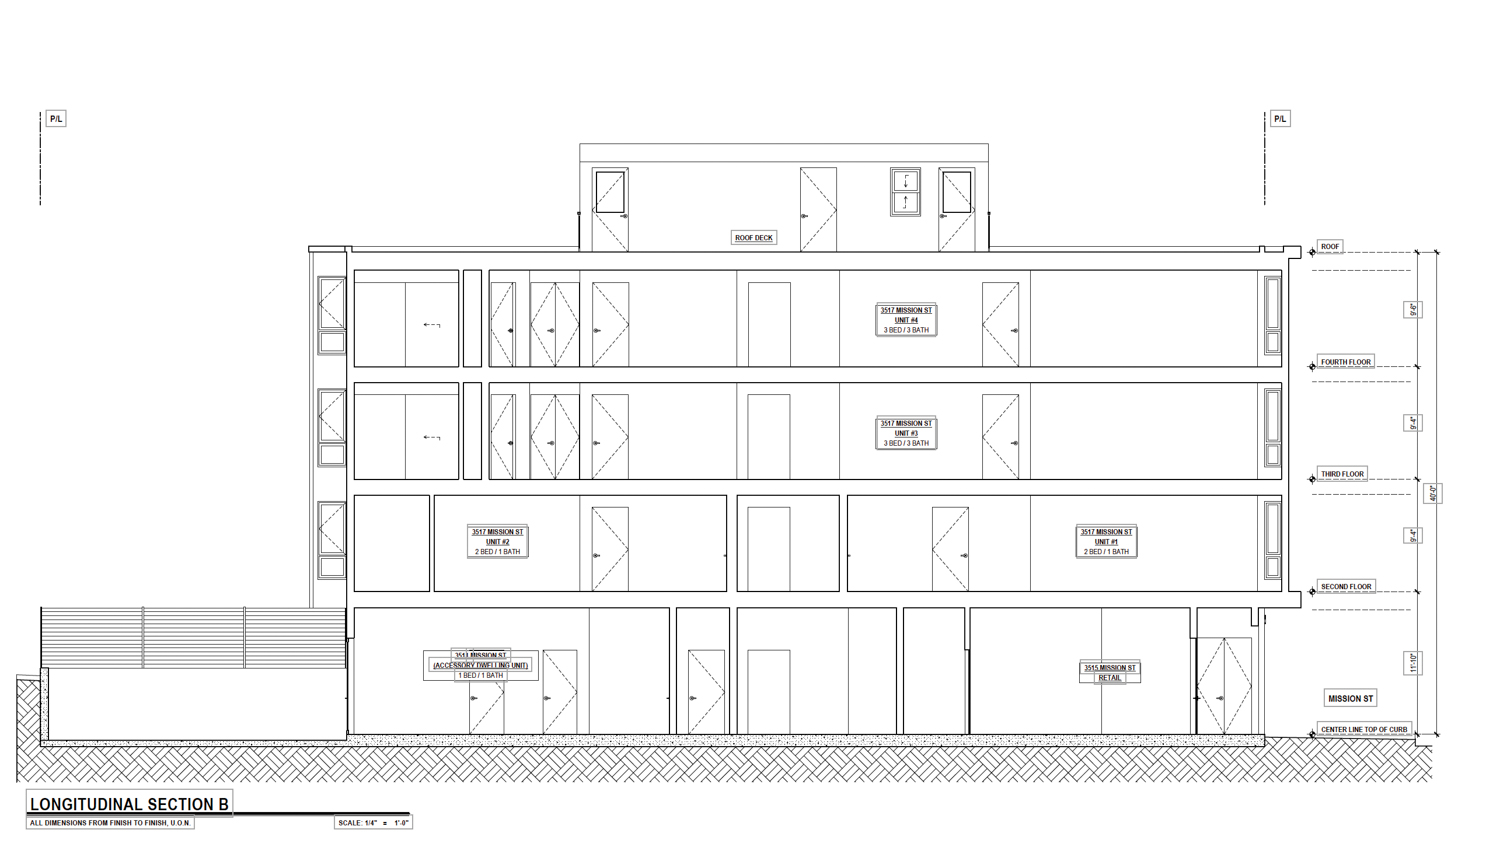 3515 Mission Street longitudinal section, rendering by Schaub Ly Architects